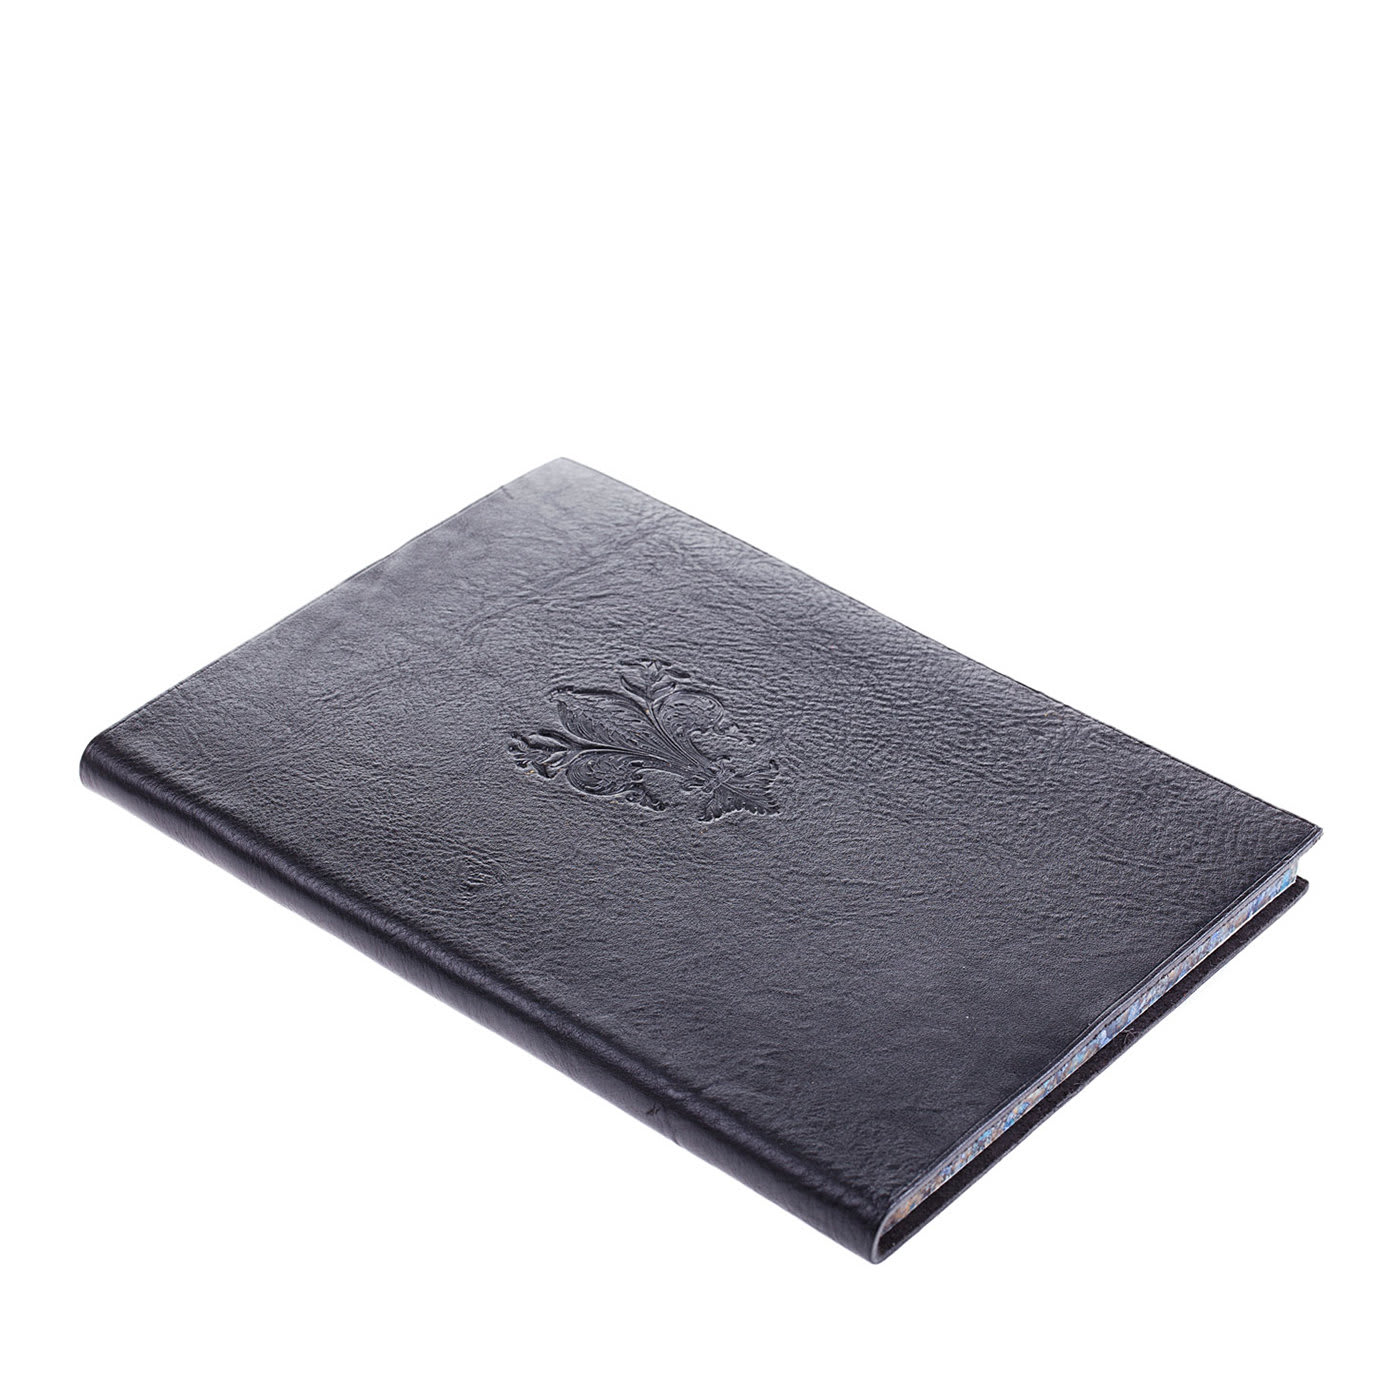 Lily Black Leather Notebook - Giannini